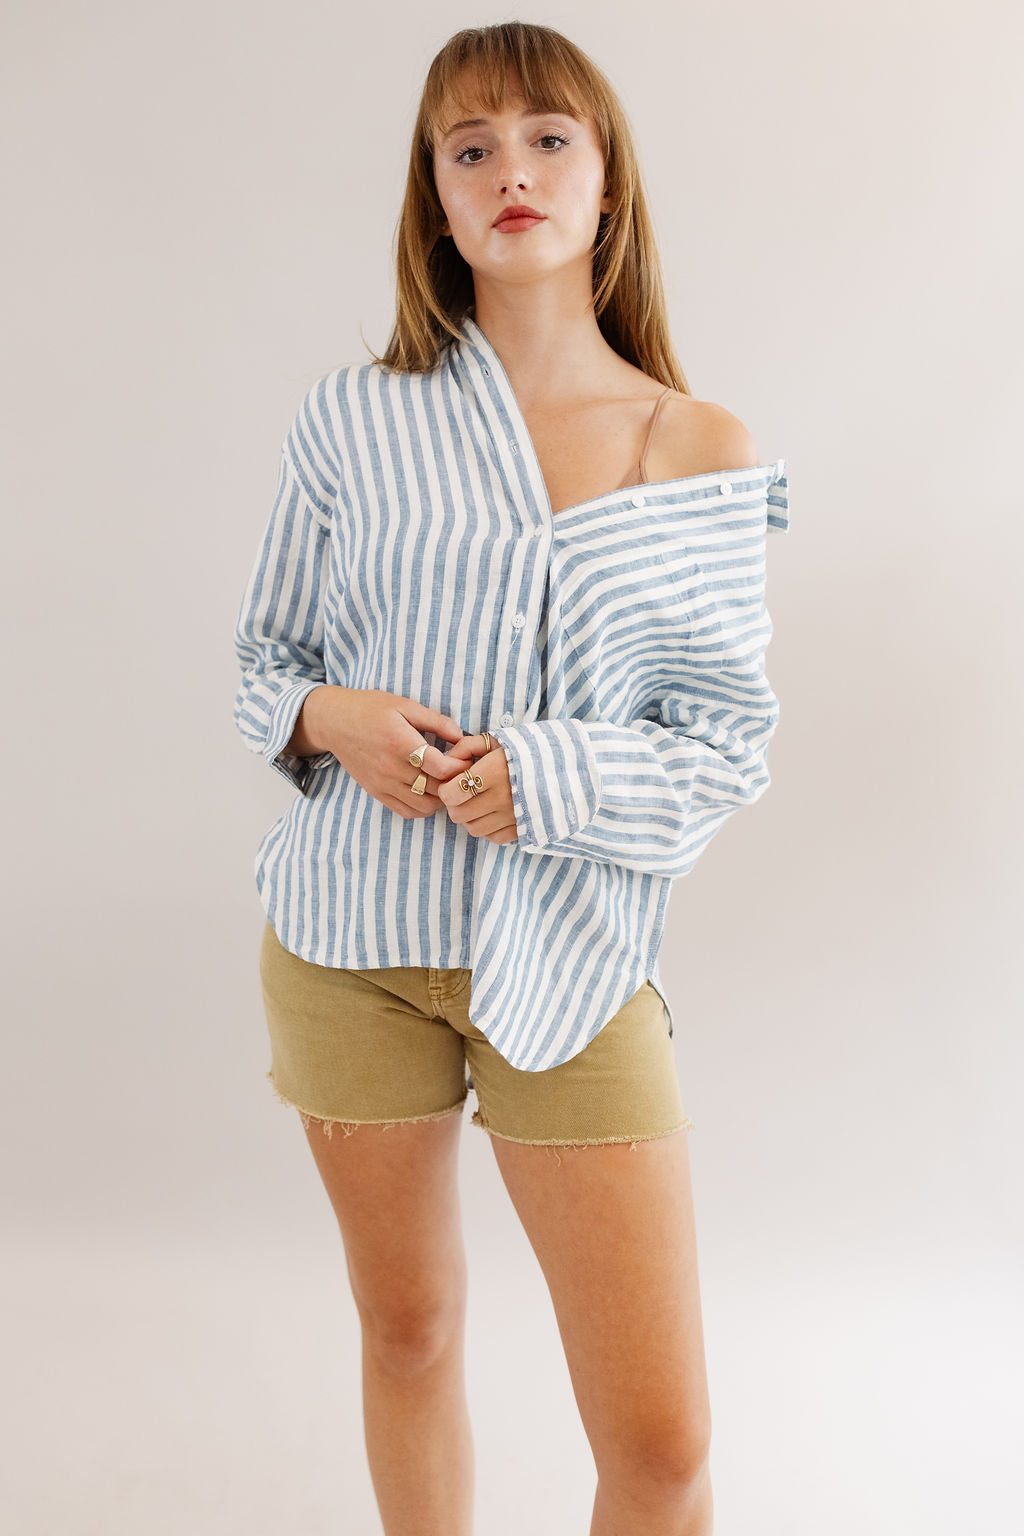 Faherty | Linen Laguna Relaxed Shirt | Blue Lucy Stripe Shirt - Poppy and Stella